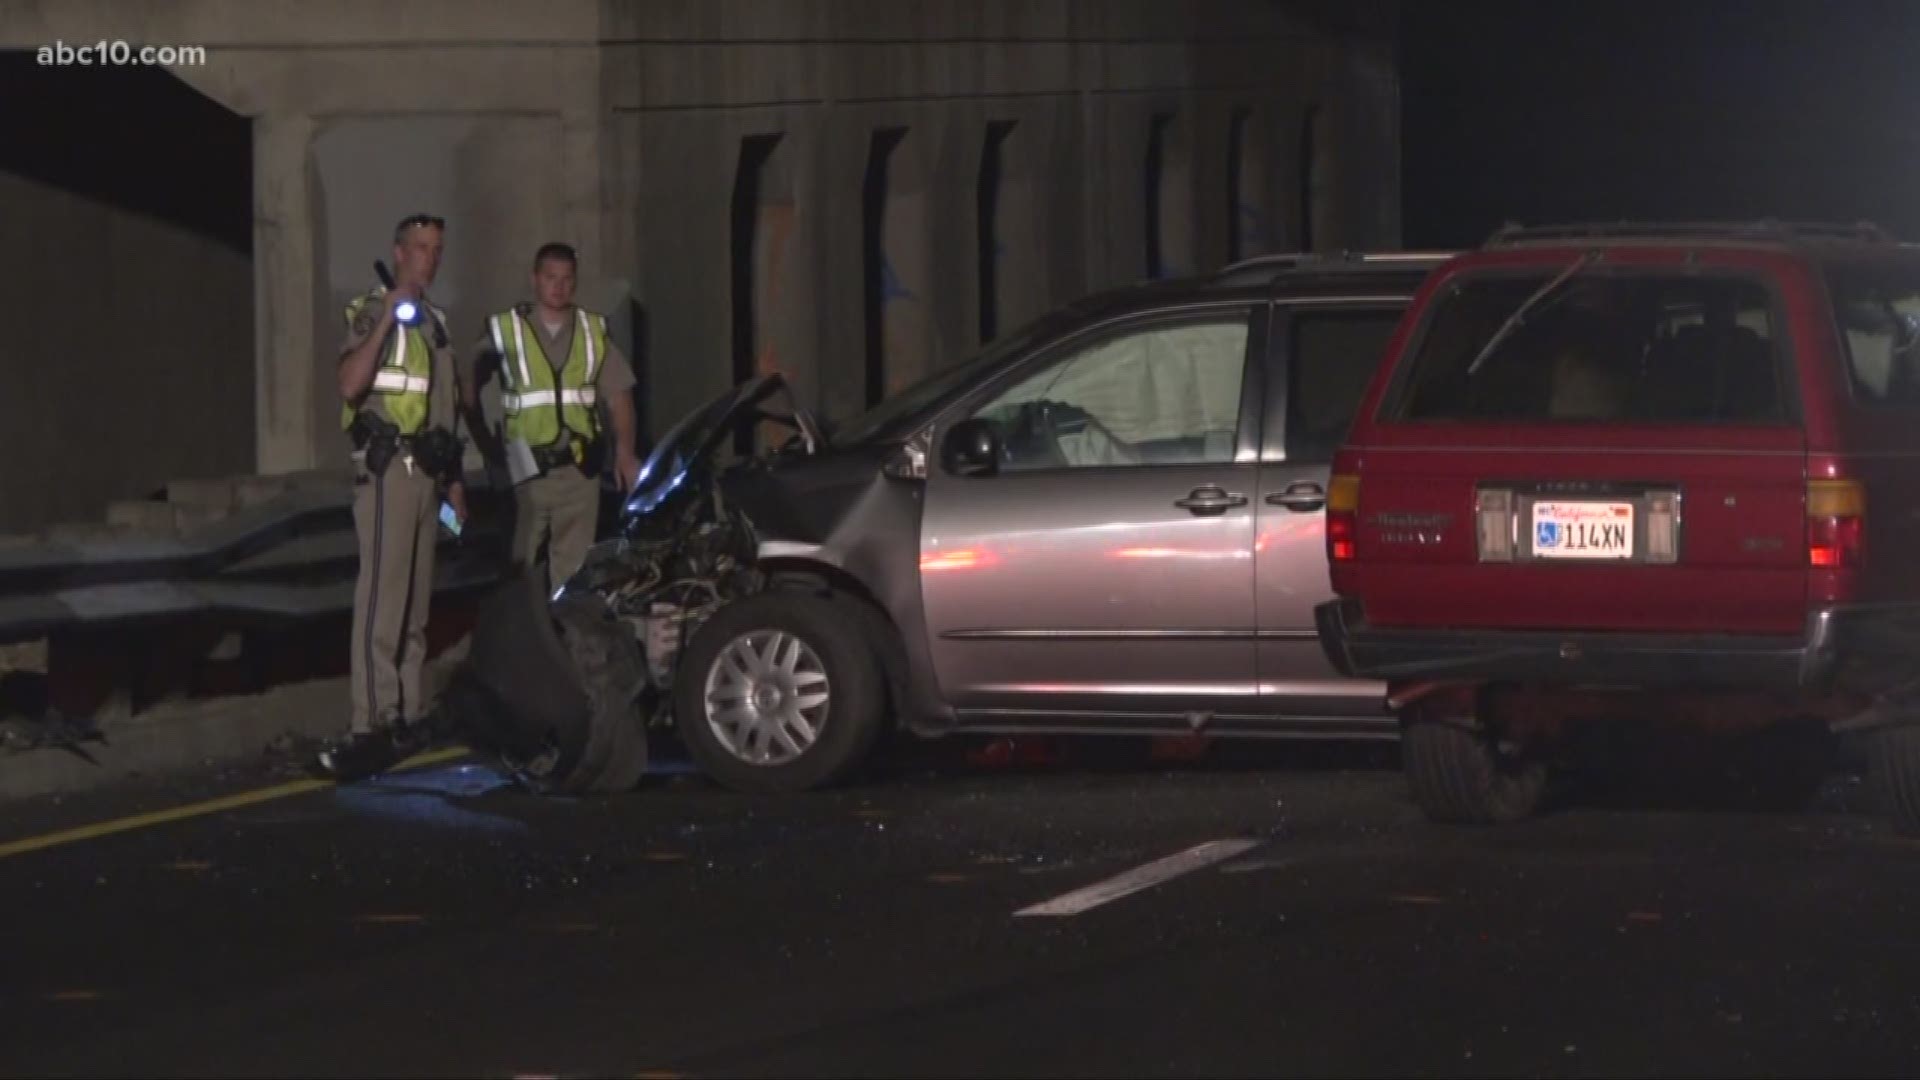 A 16-year-old was killed in a crash along Highway 99 on Sunday night.